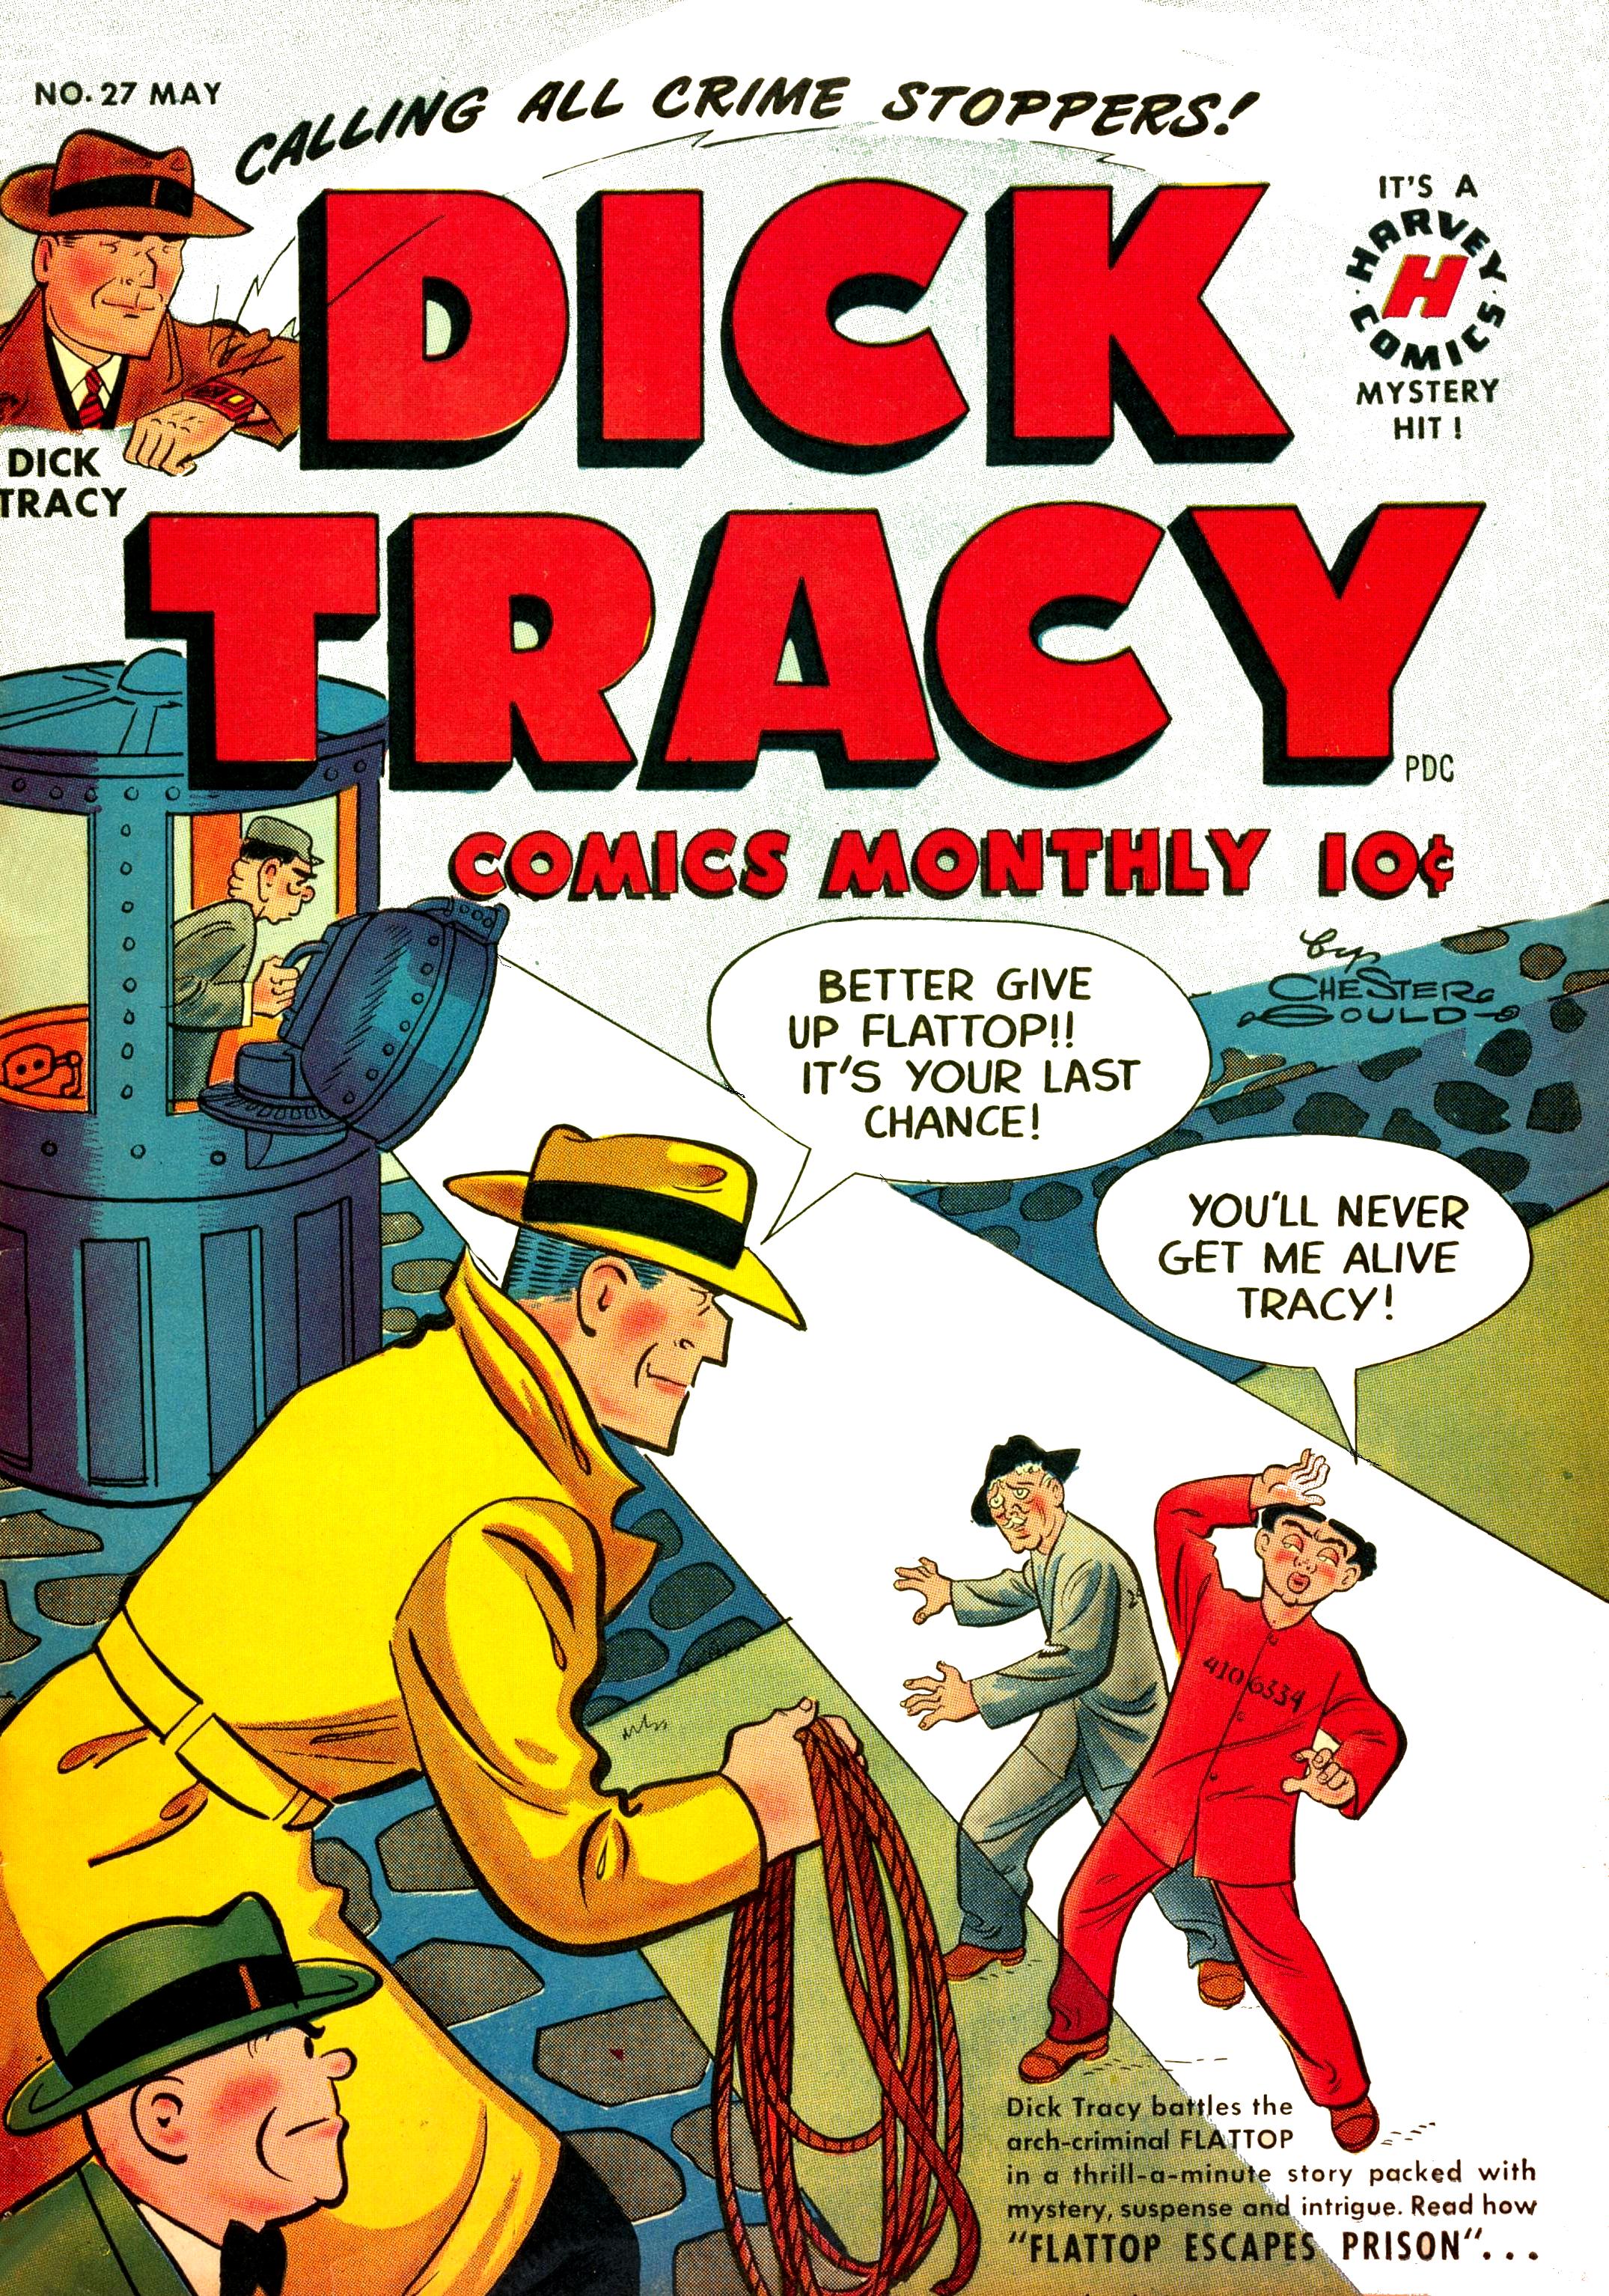 Read online Dick Tracy comic -  Issue #27 - 1